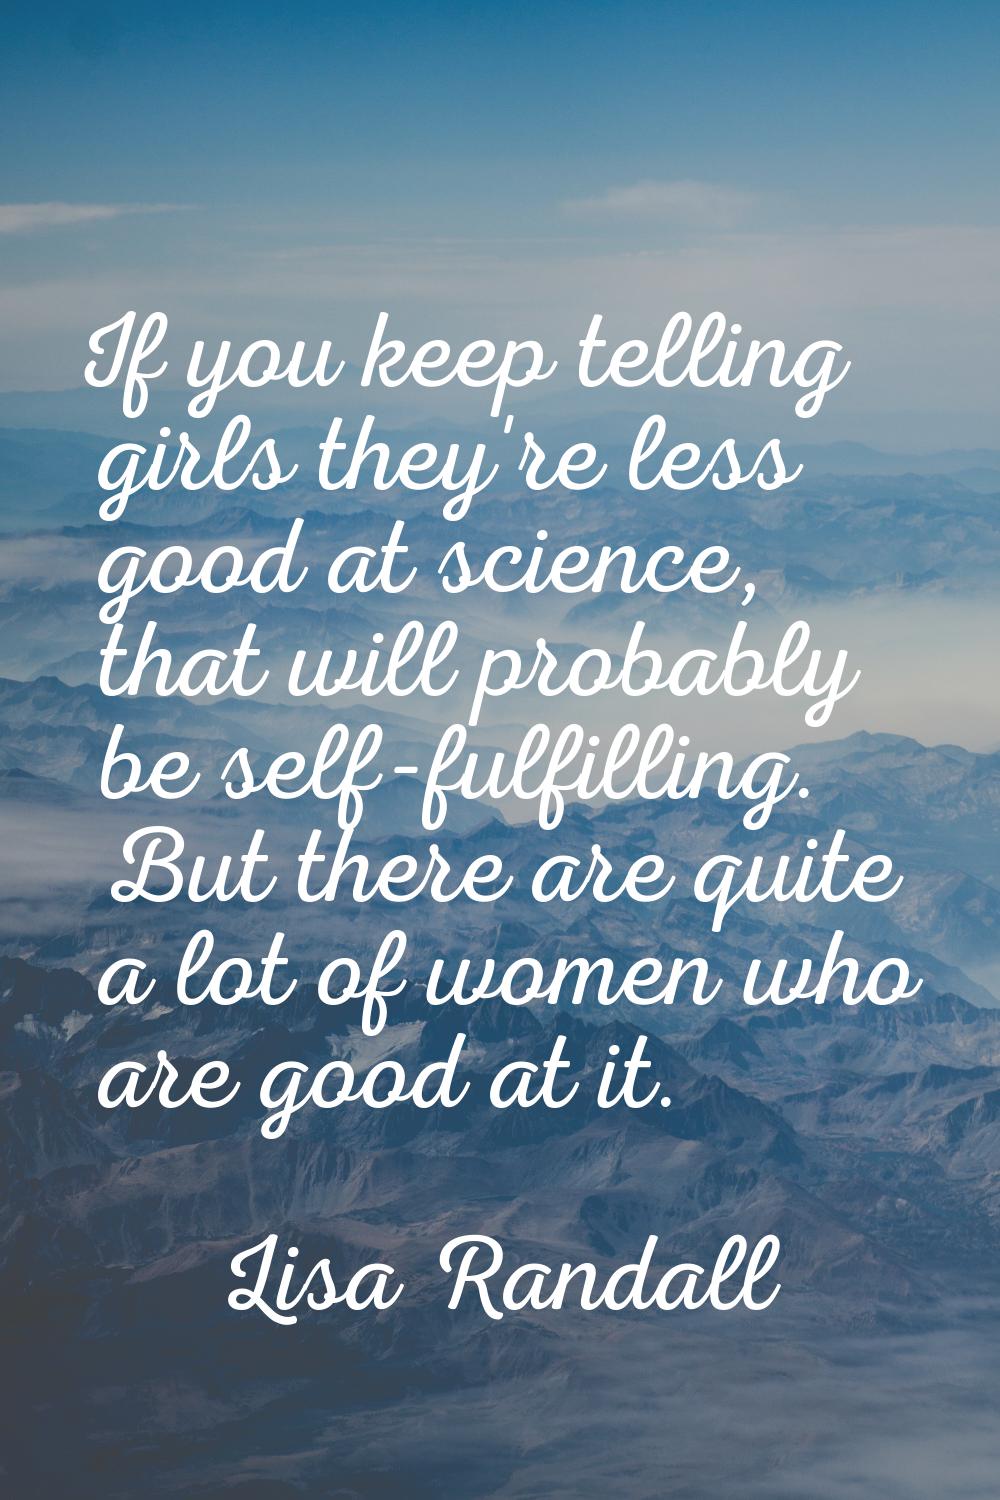 If you keep telling girls they're less good at science, that will probably be self-fulfilling. But 